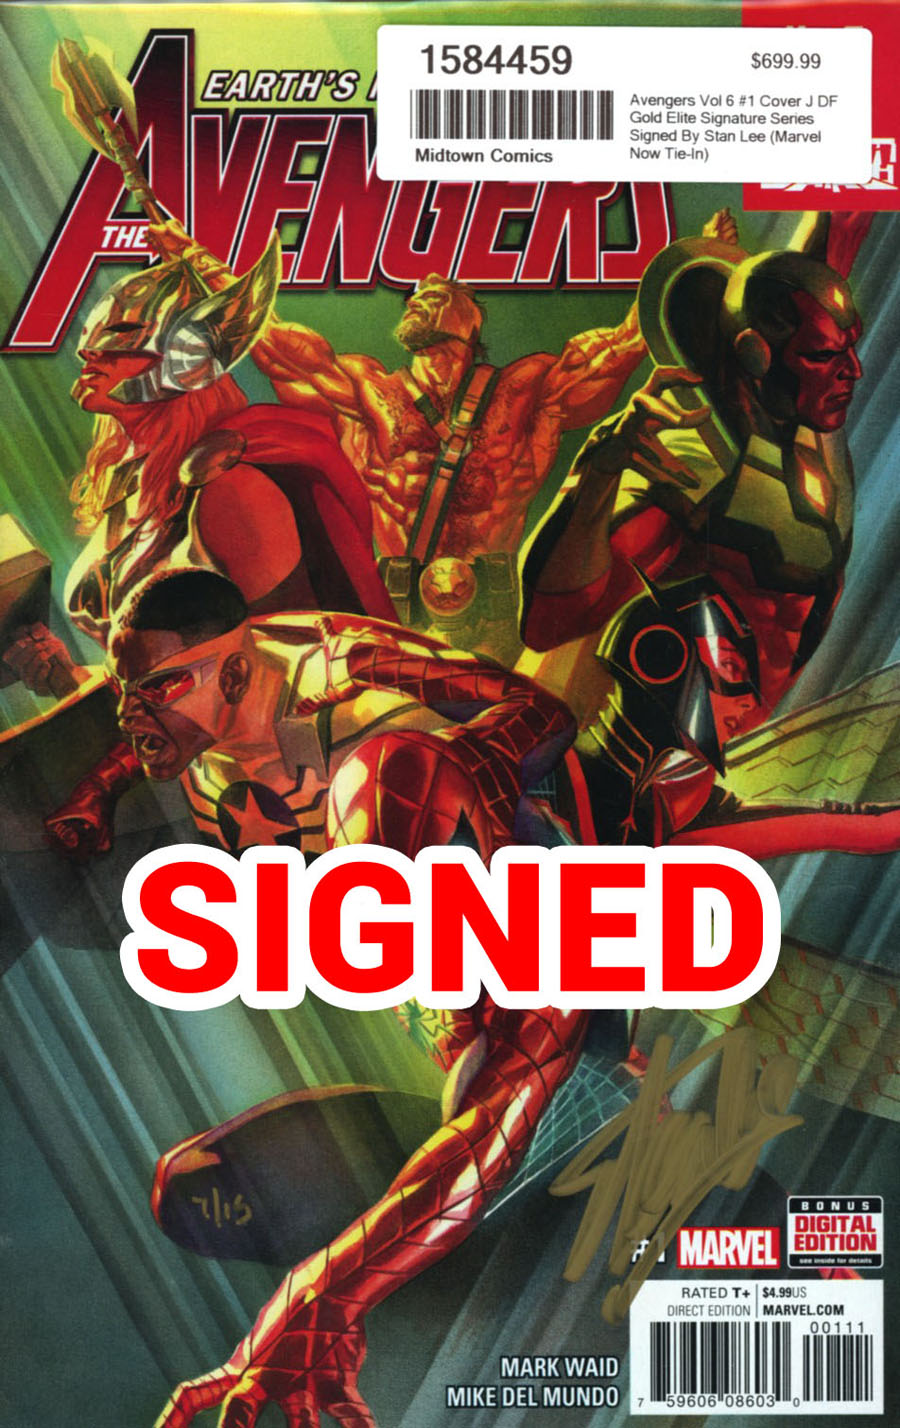 Avengers Vol 6 #1 Cover J DF Gold Elite Signature Series Signed By Stan Lee (Marvel Now Tie-In)